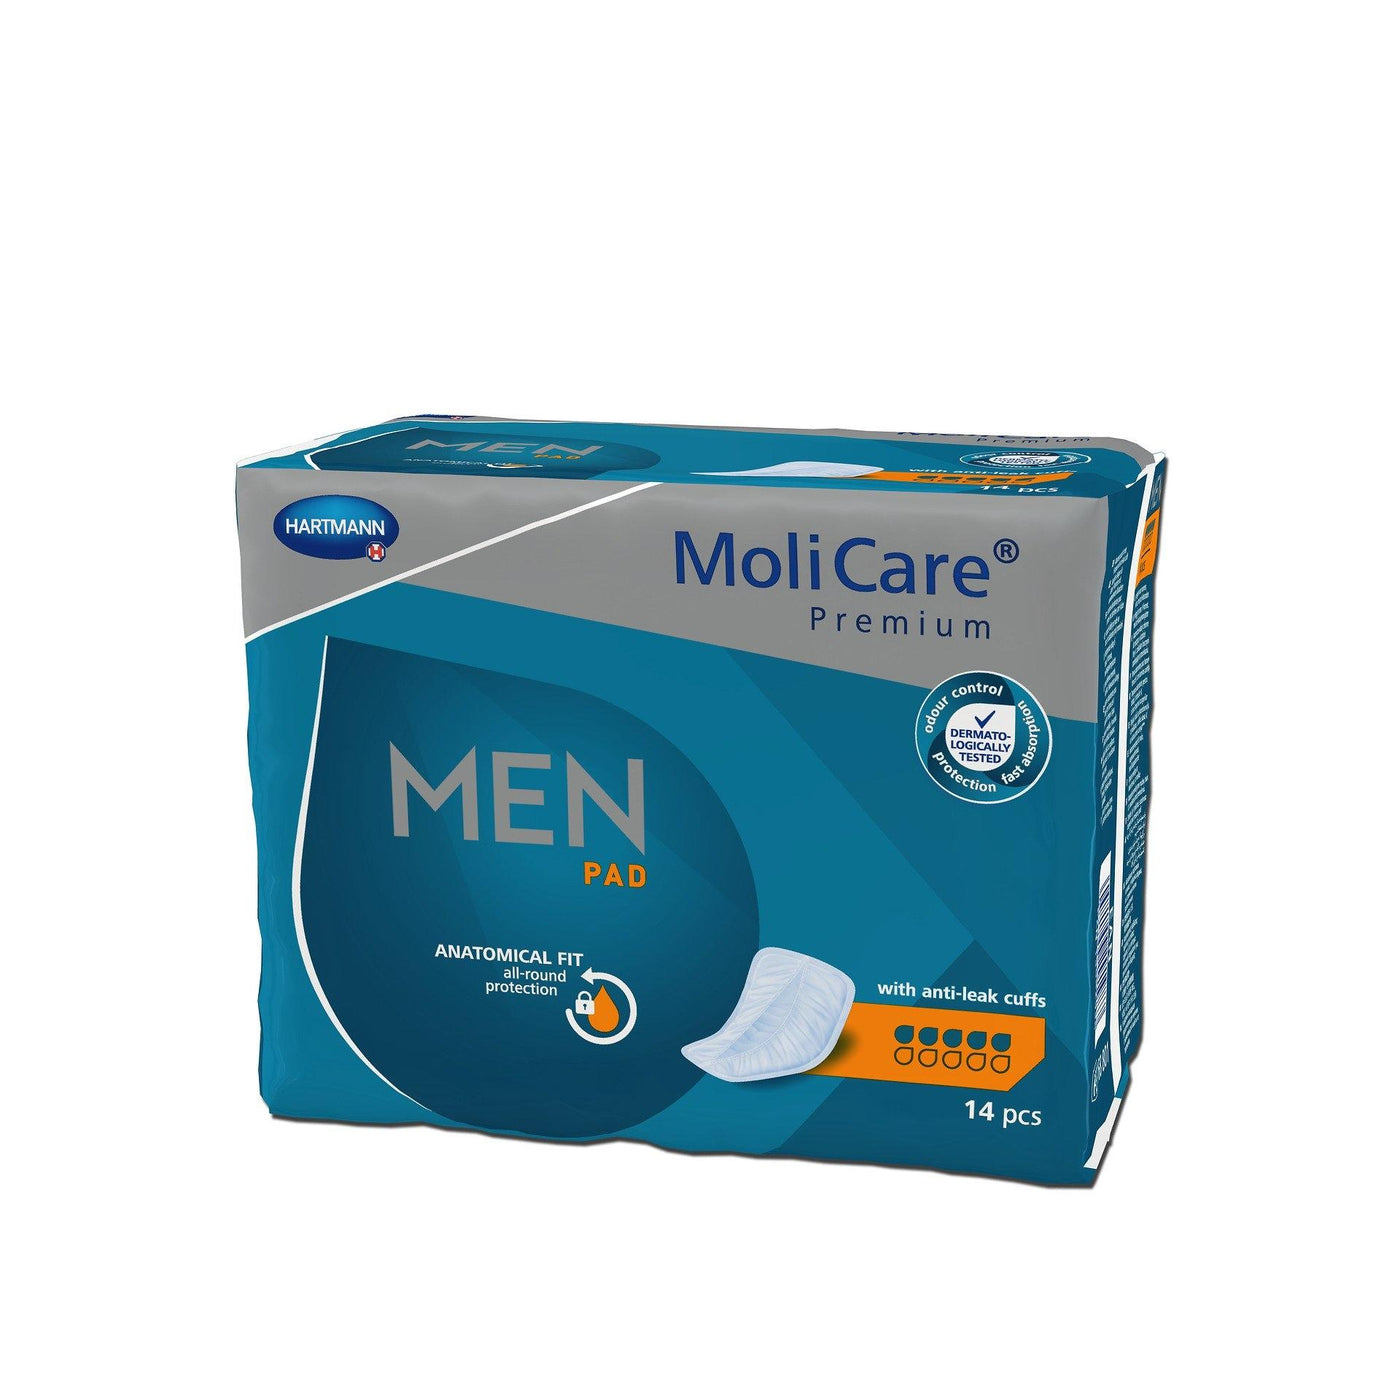 MoliCare Premium Men Pad formerly MoliMed discreet, anatomically